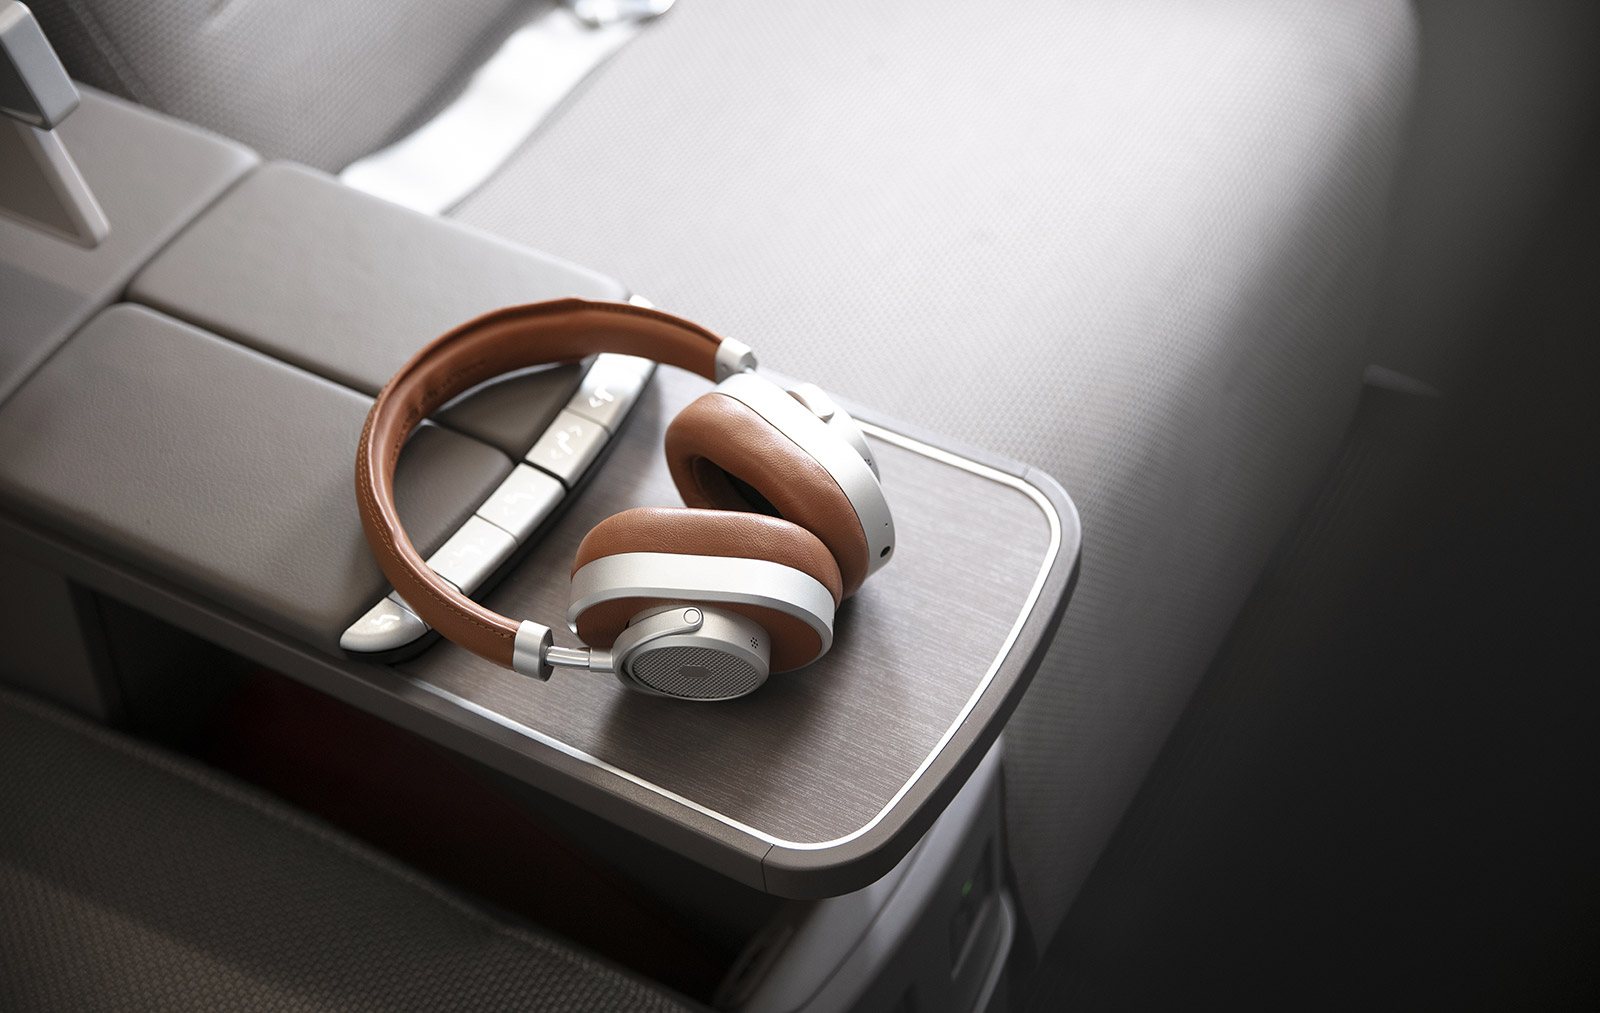 A pair of Bose noise-cancelling headphones on offer in Business Class on Cathay Pacific's new Airbus A321neo